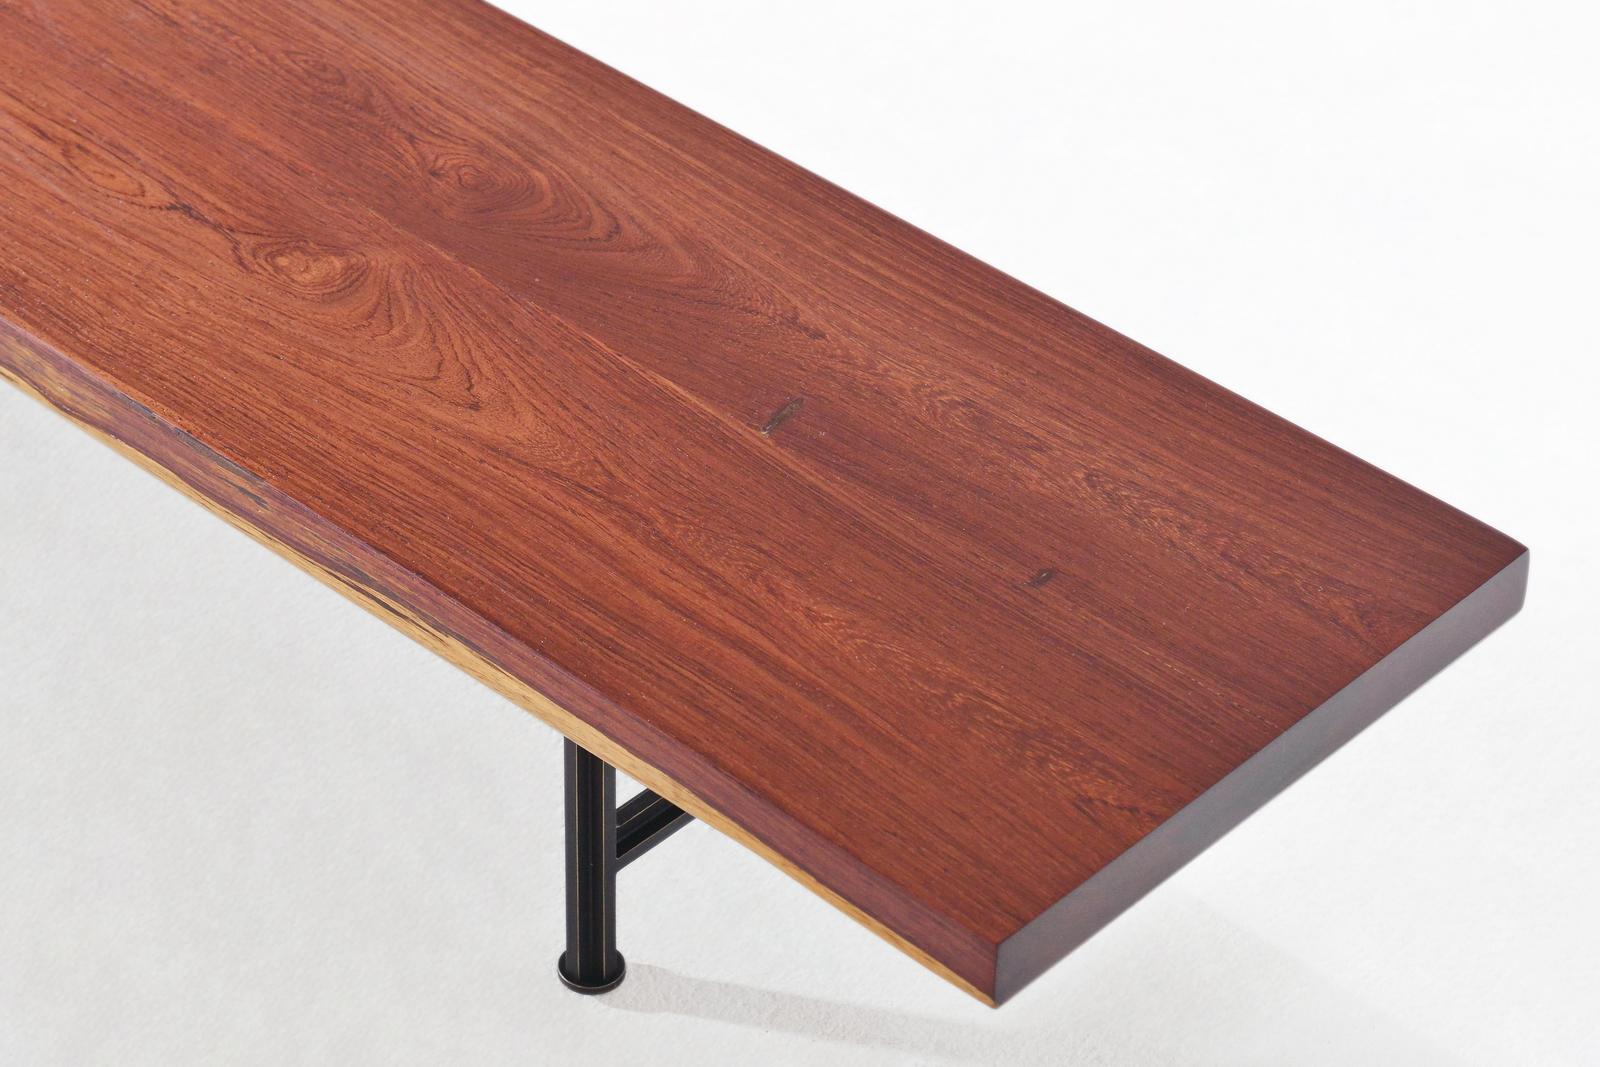 Hand-Crafted Bespoke Low Table Reclaimed Hardwood on Solid Brass Base, by P. Tendercool For Sale